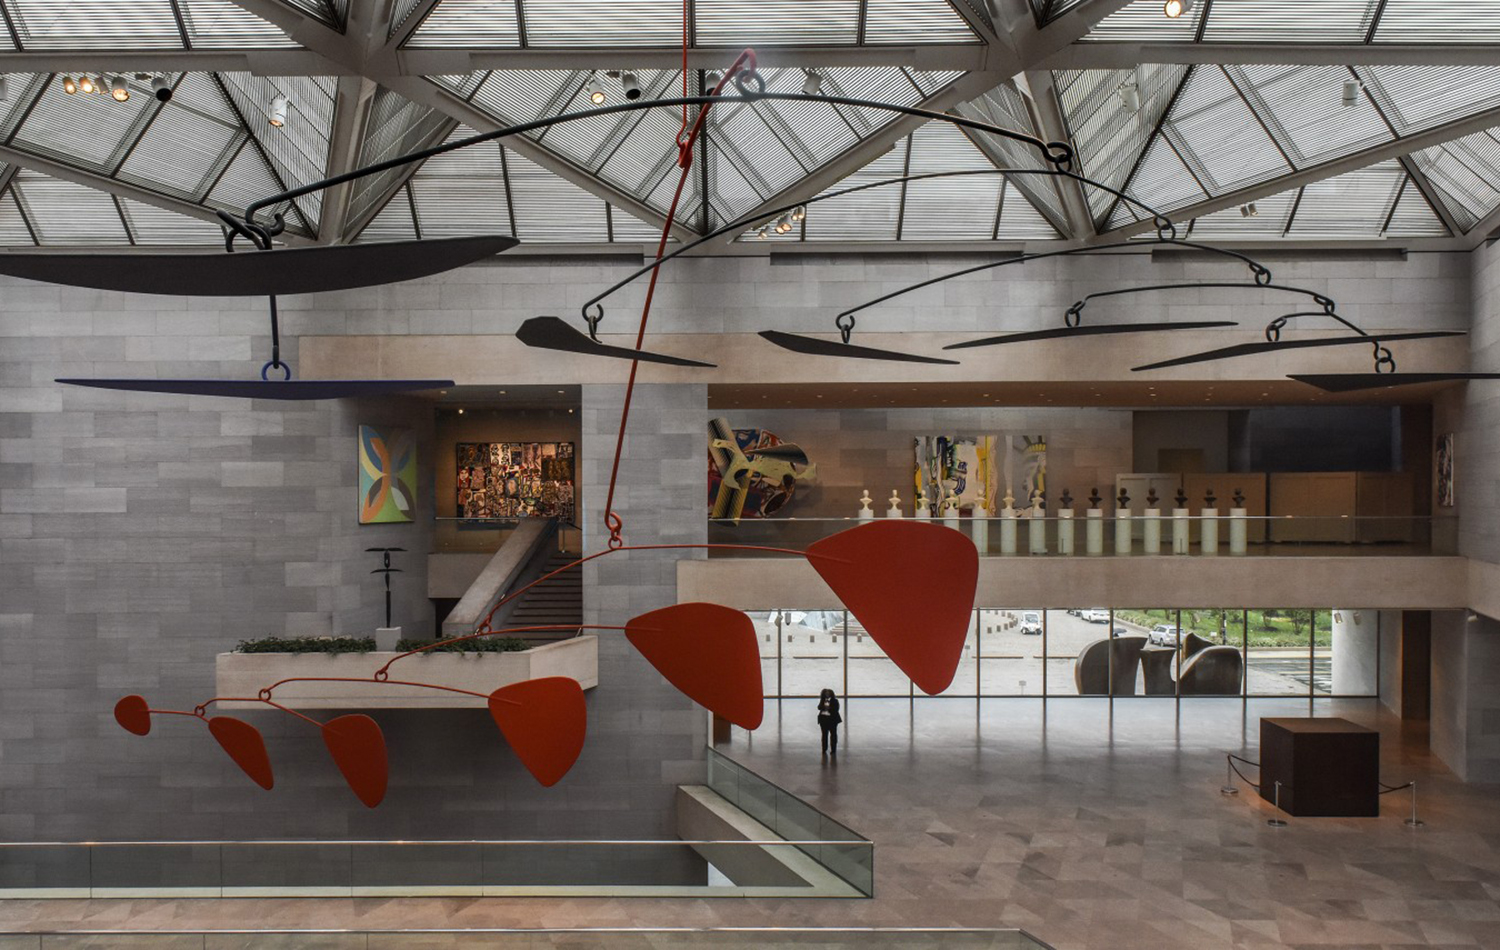  The Alexander Calder mobile moves gently on its axis in the East Building's main atrium. (Bill O'Leary/The Washington Post) 